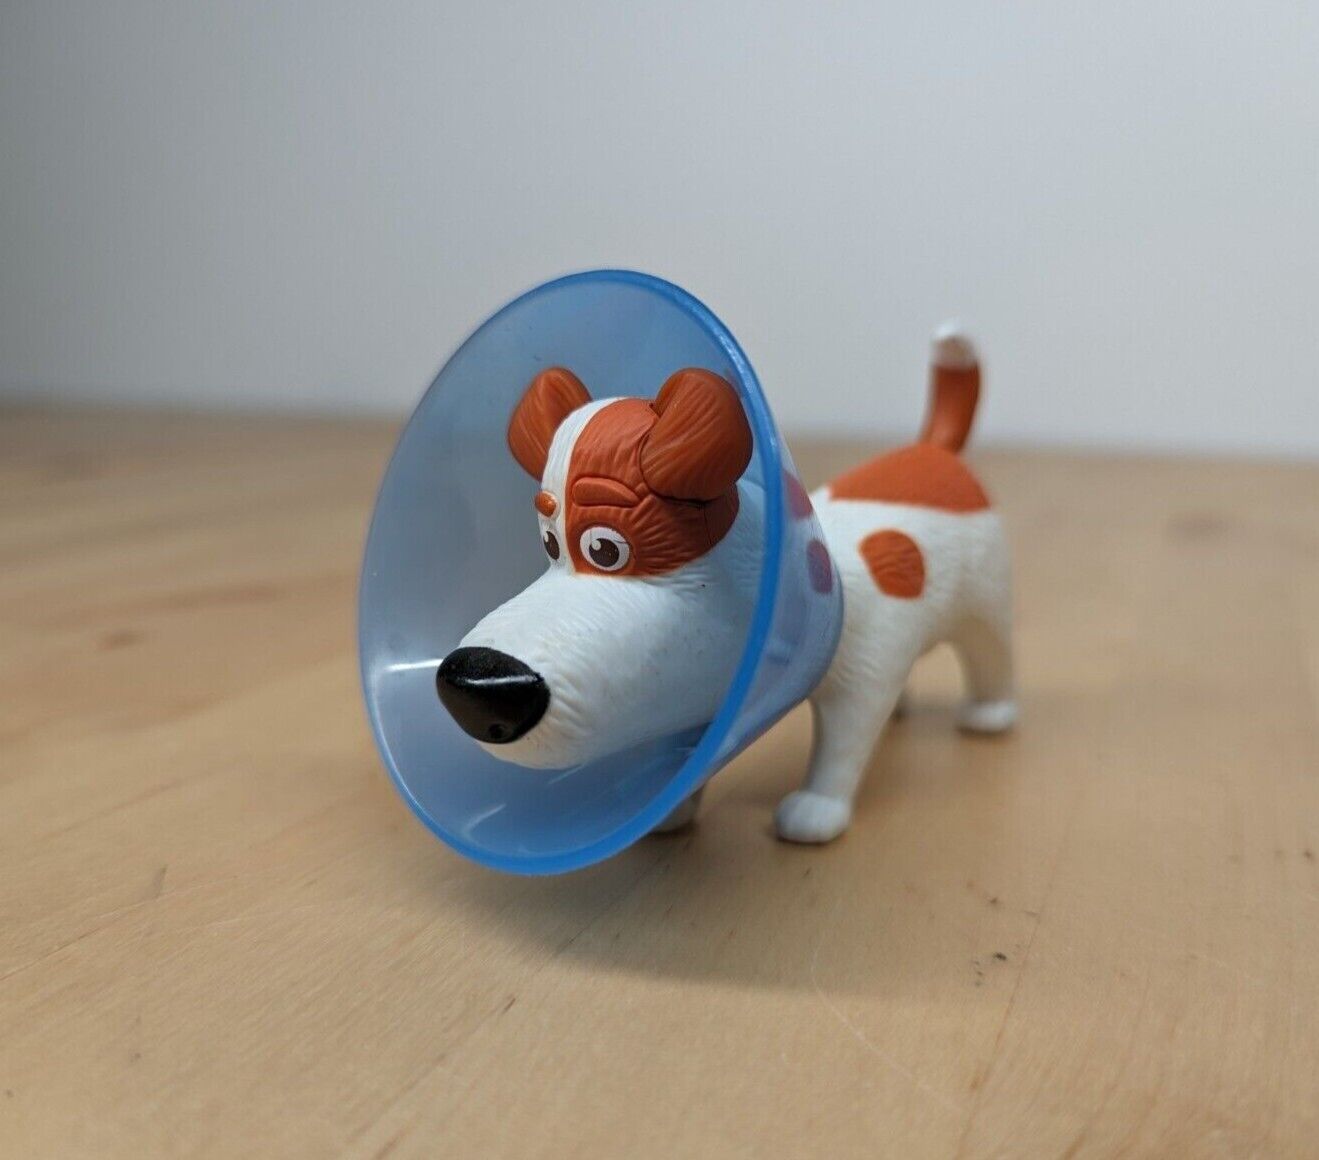 2019 McDonalds Happy Meal Toy Secret Life Of Pets 2 Max Cone of Shame 4\